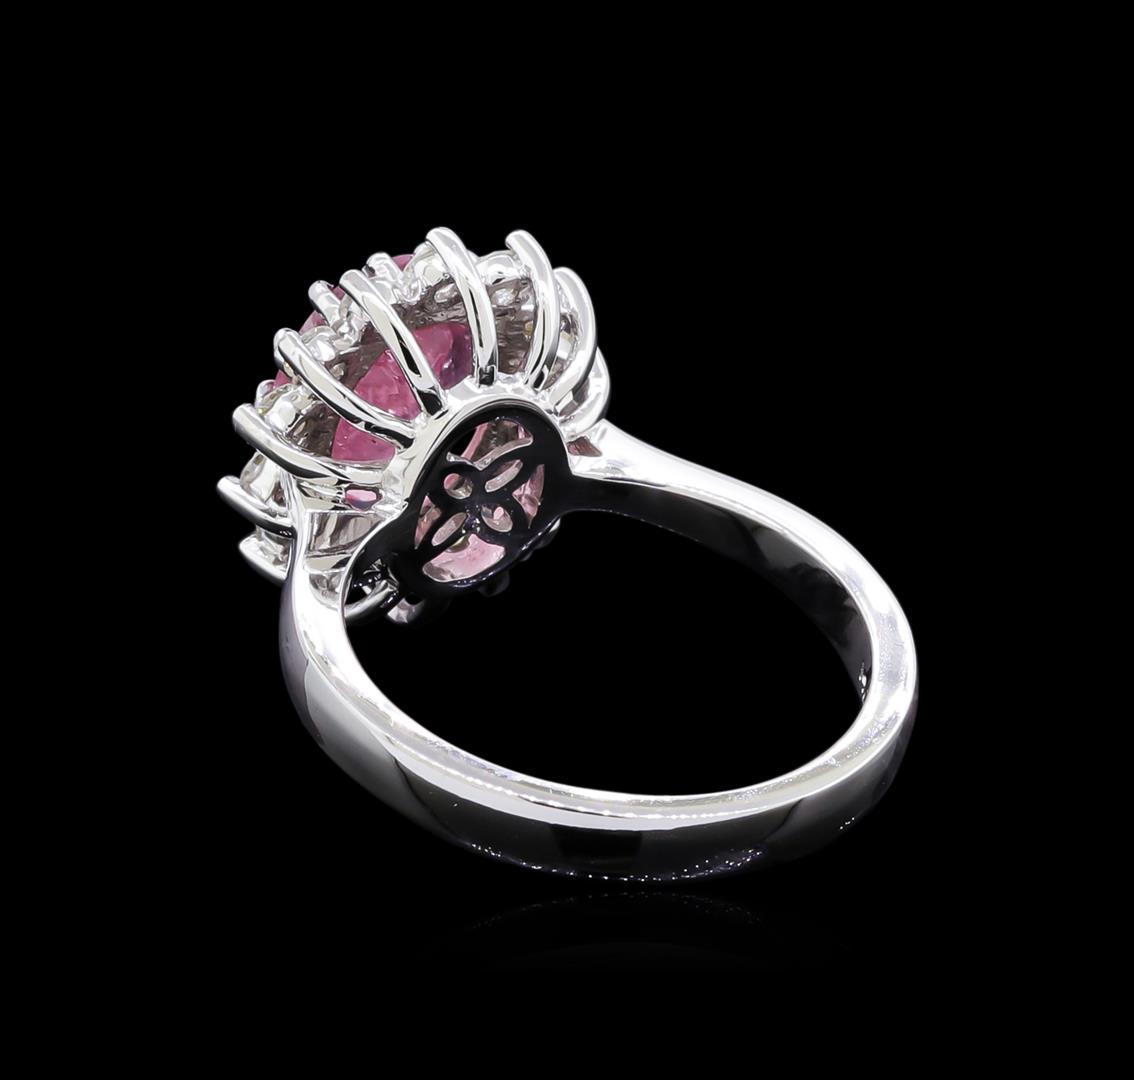 2.40 ctw Pink Topaz and Diamond Ring - 14KT White Gold